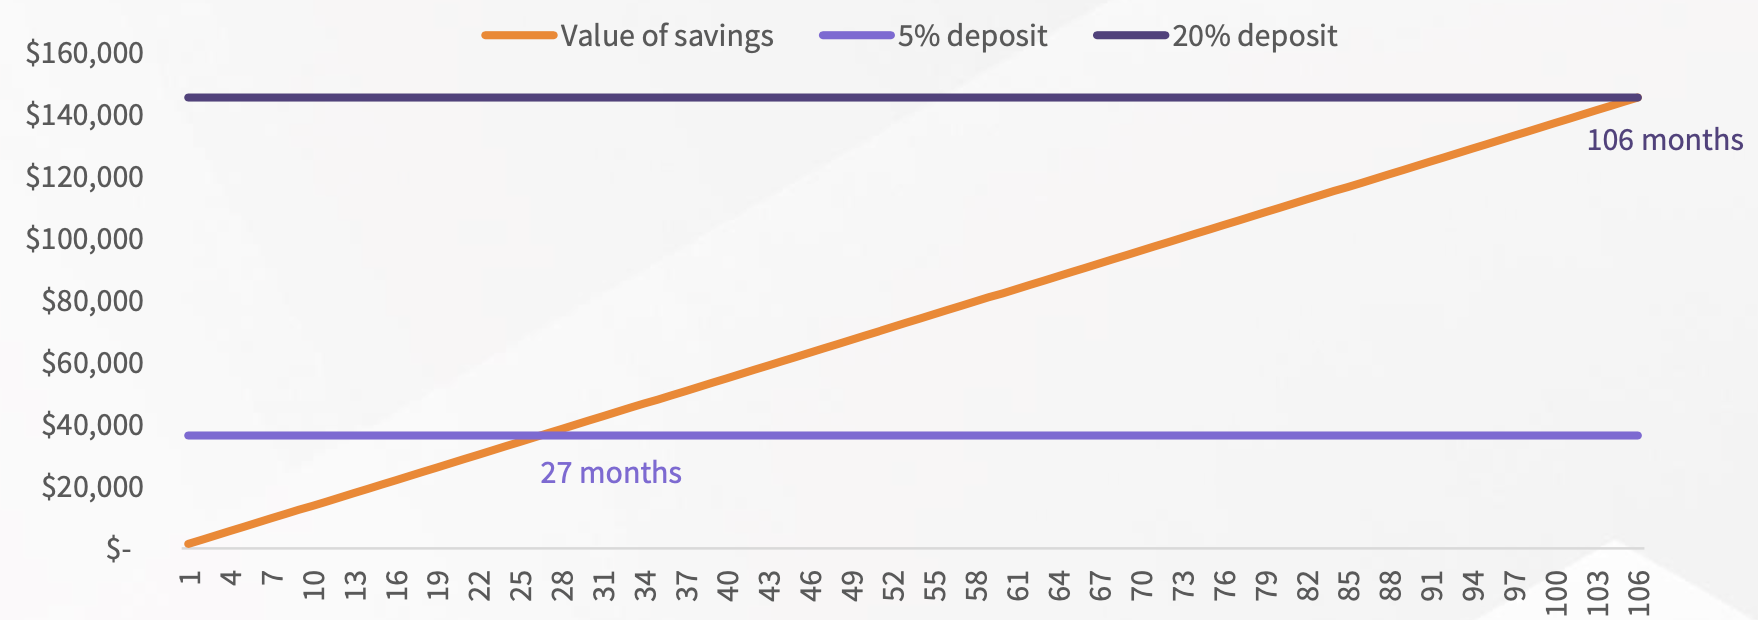 Figure 1.0. Months of savings required for a 5% versus a 20% deposit